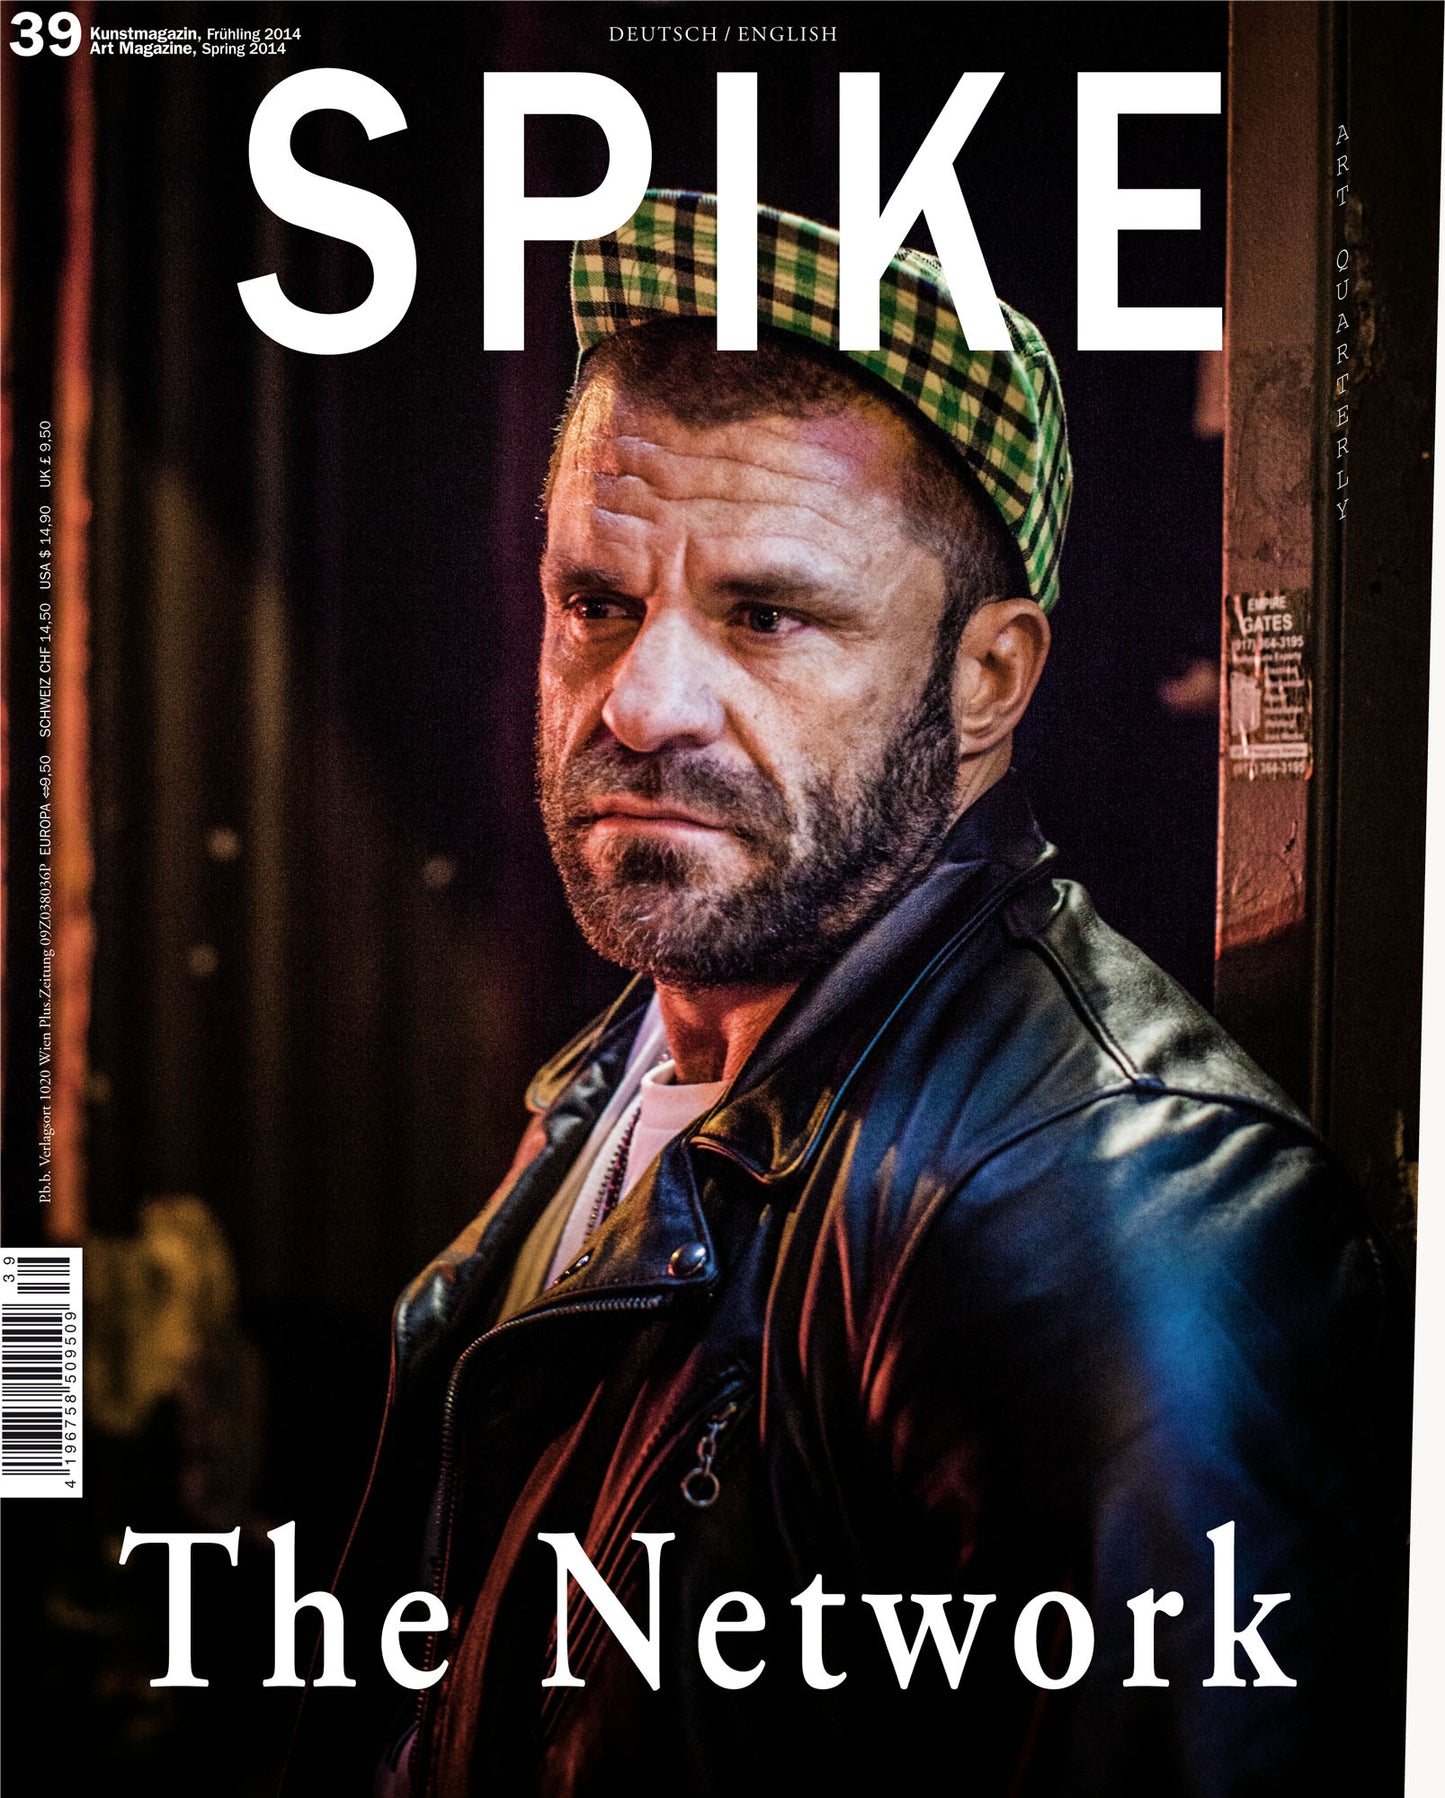 ISSUE 39 (SPRING 2014): The Network